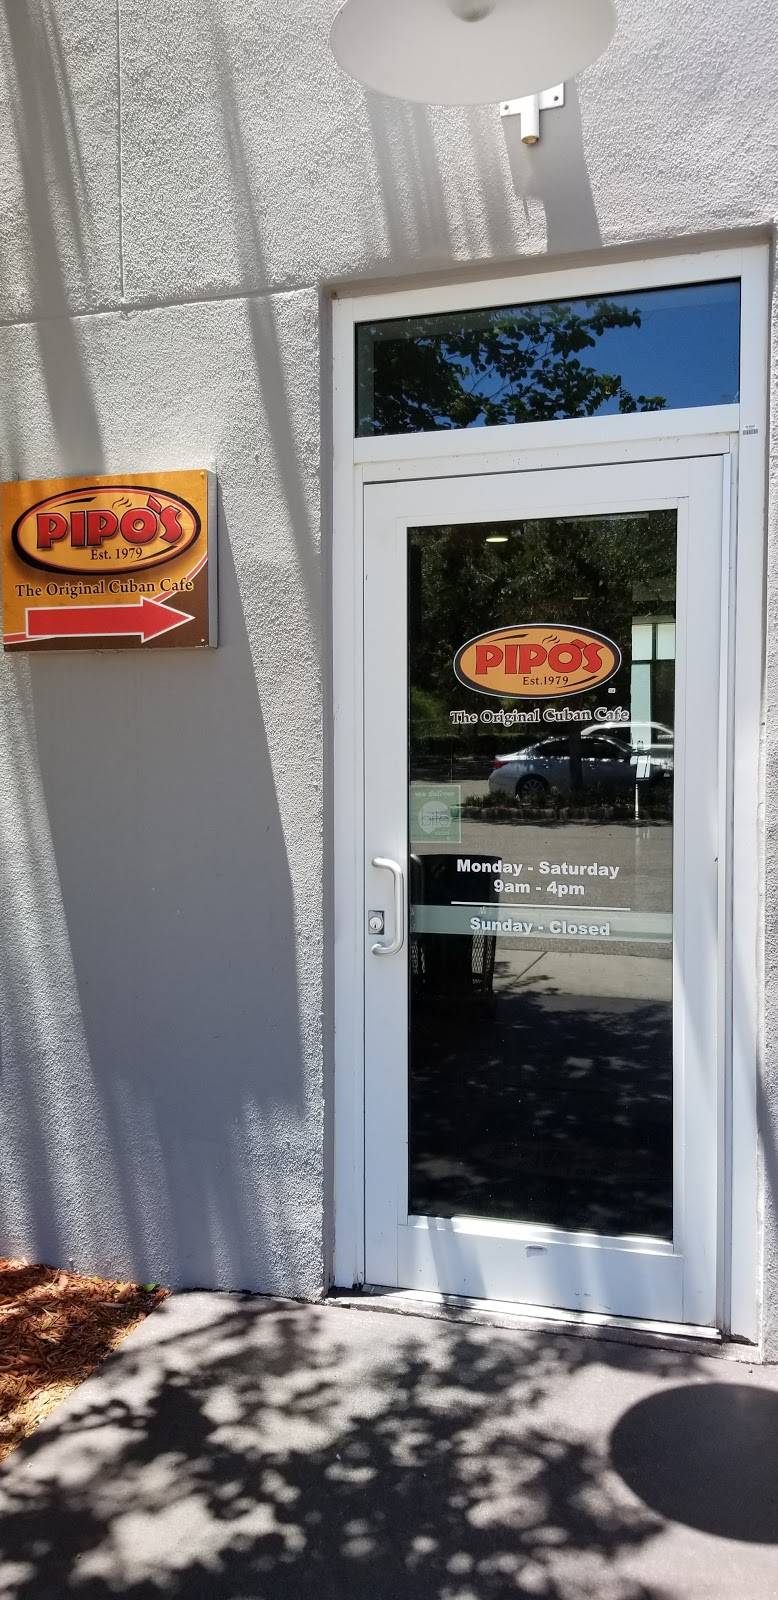 Pipos To Go at the Manhattan Casino | restaurant | 642 22nd St S, St. Petersburg, FL 33712, USA | 7272561808 OR +1 727-256-1808